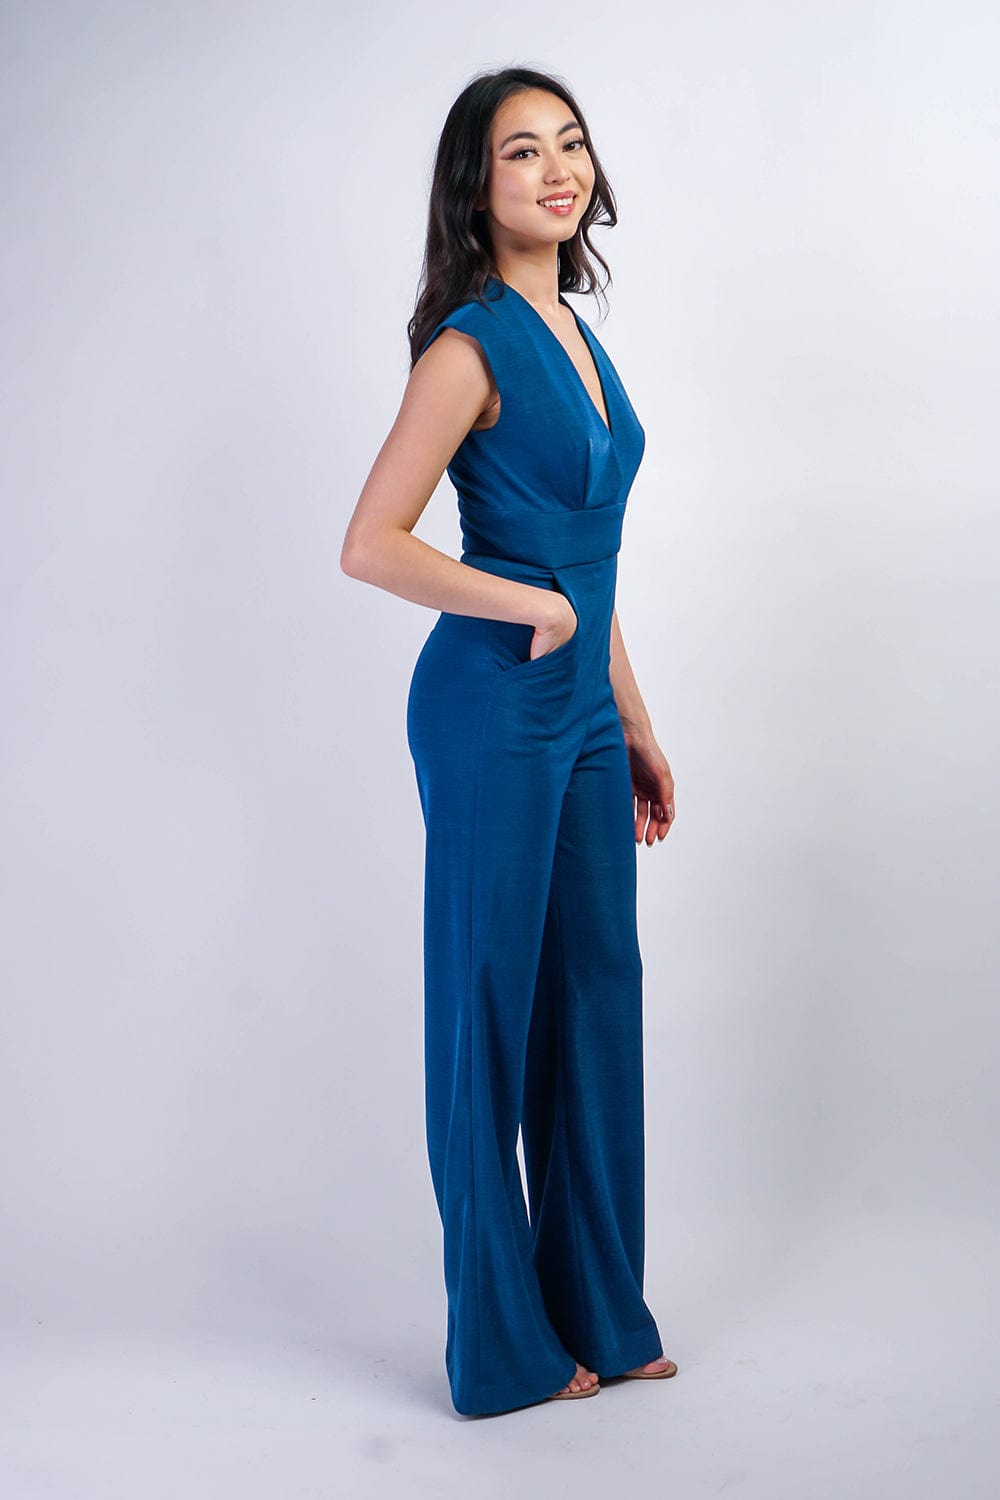 Chloe Dao JUMPSUITS &amp; ROMPERS Saphire Blue Luxe V Neck Aiden Jumpsuit